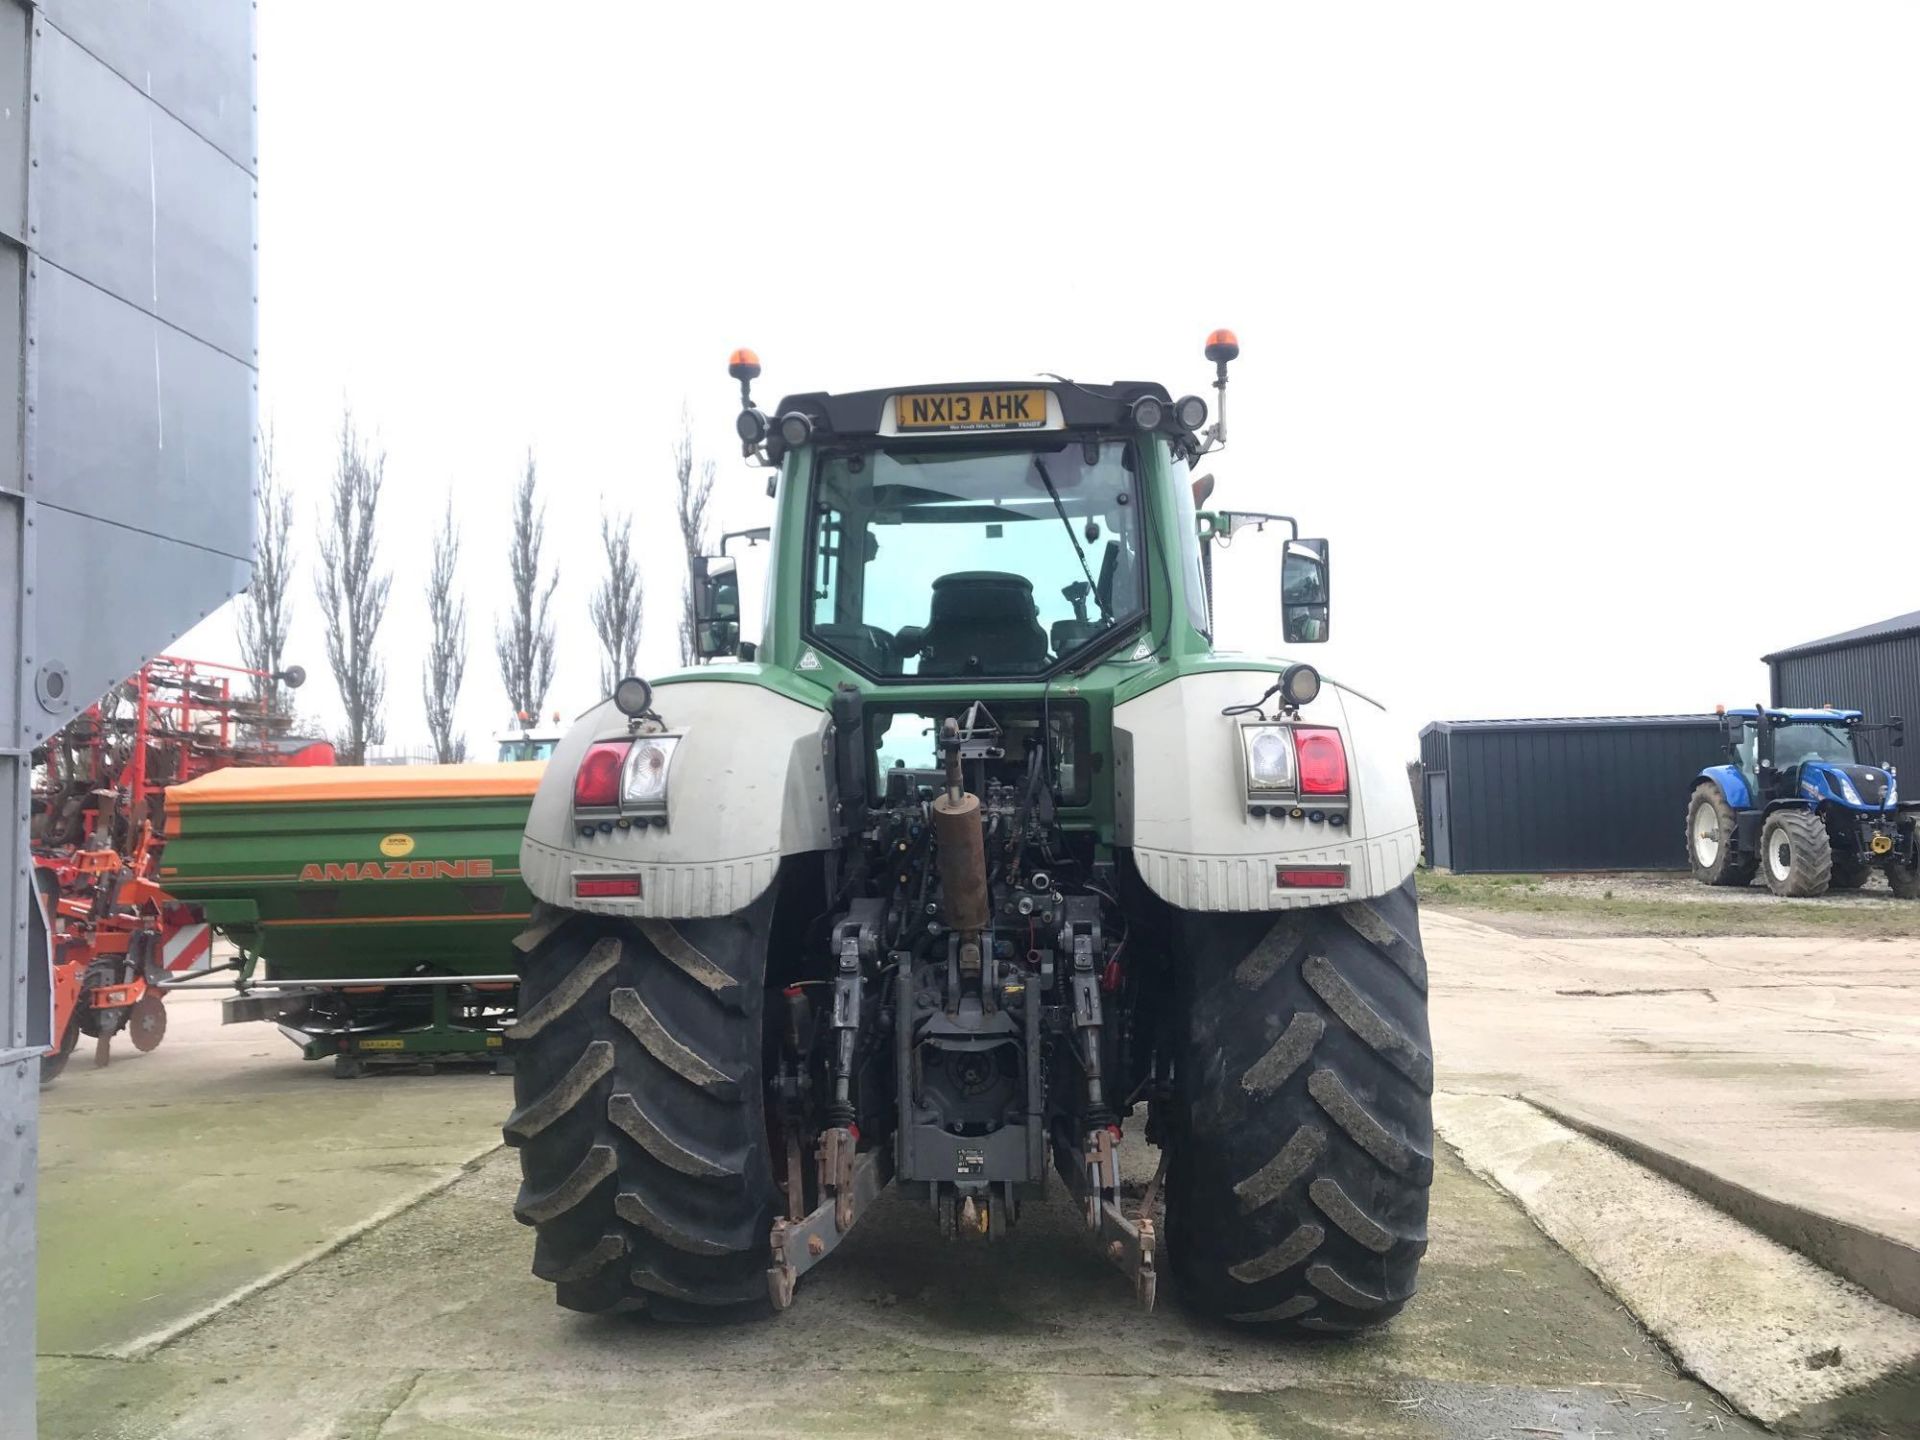 2013 Fendt 828 Vario tractor, 4wd, front linkage, front spool valves, 4No rear spool valves, Bill Be - Image 5 of 23